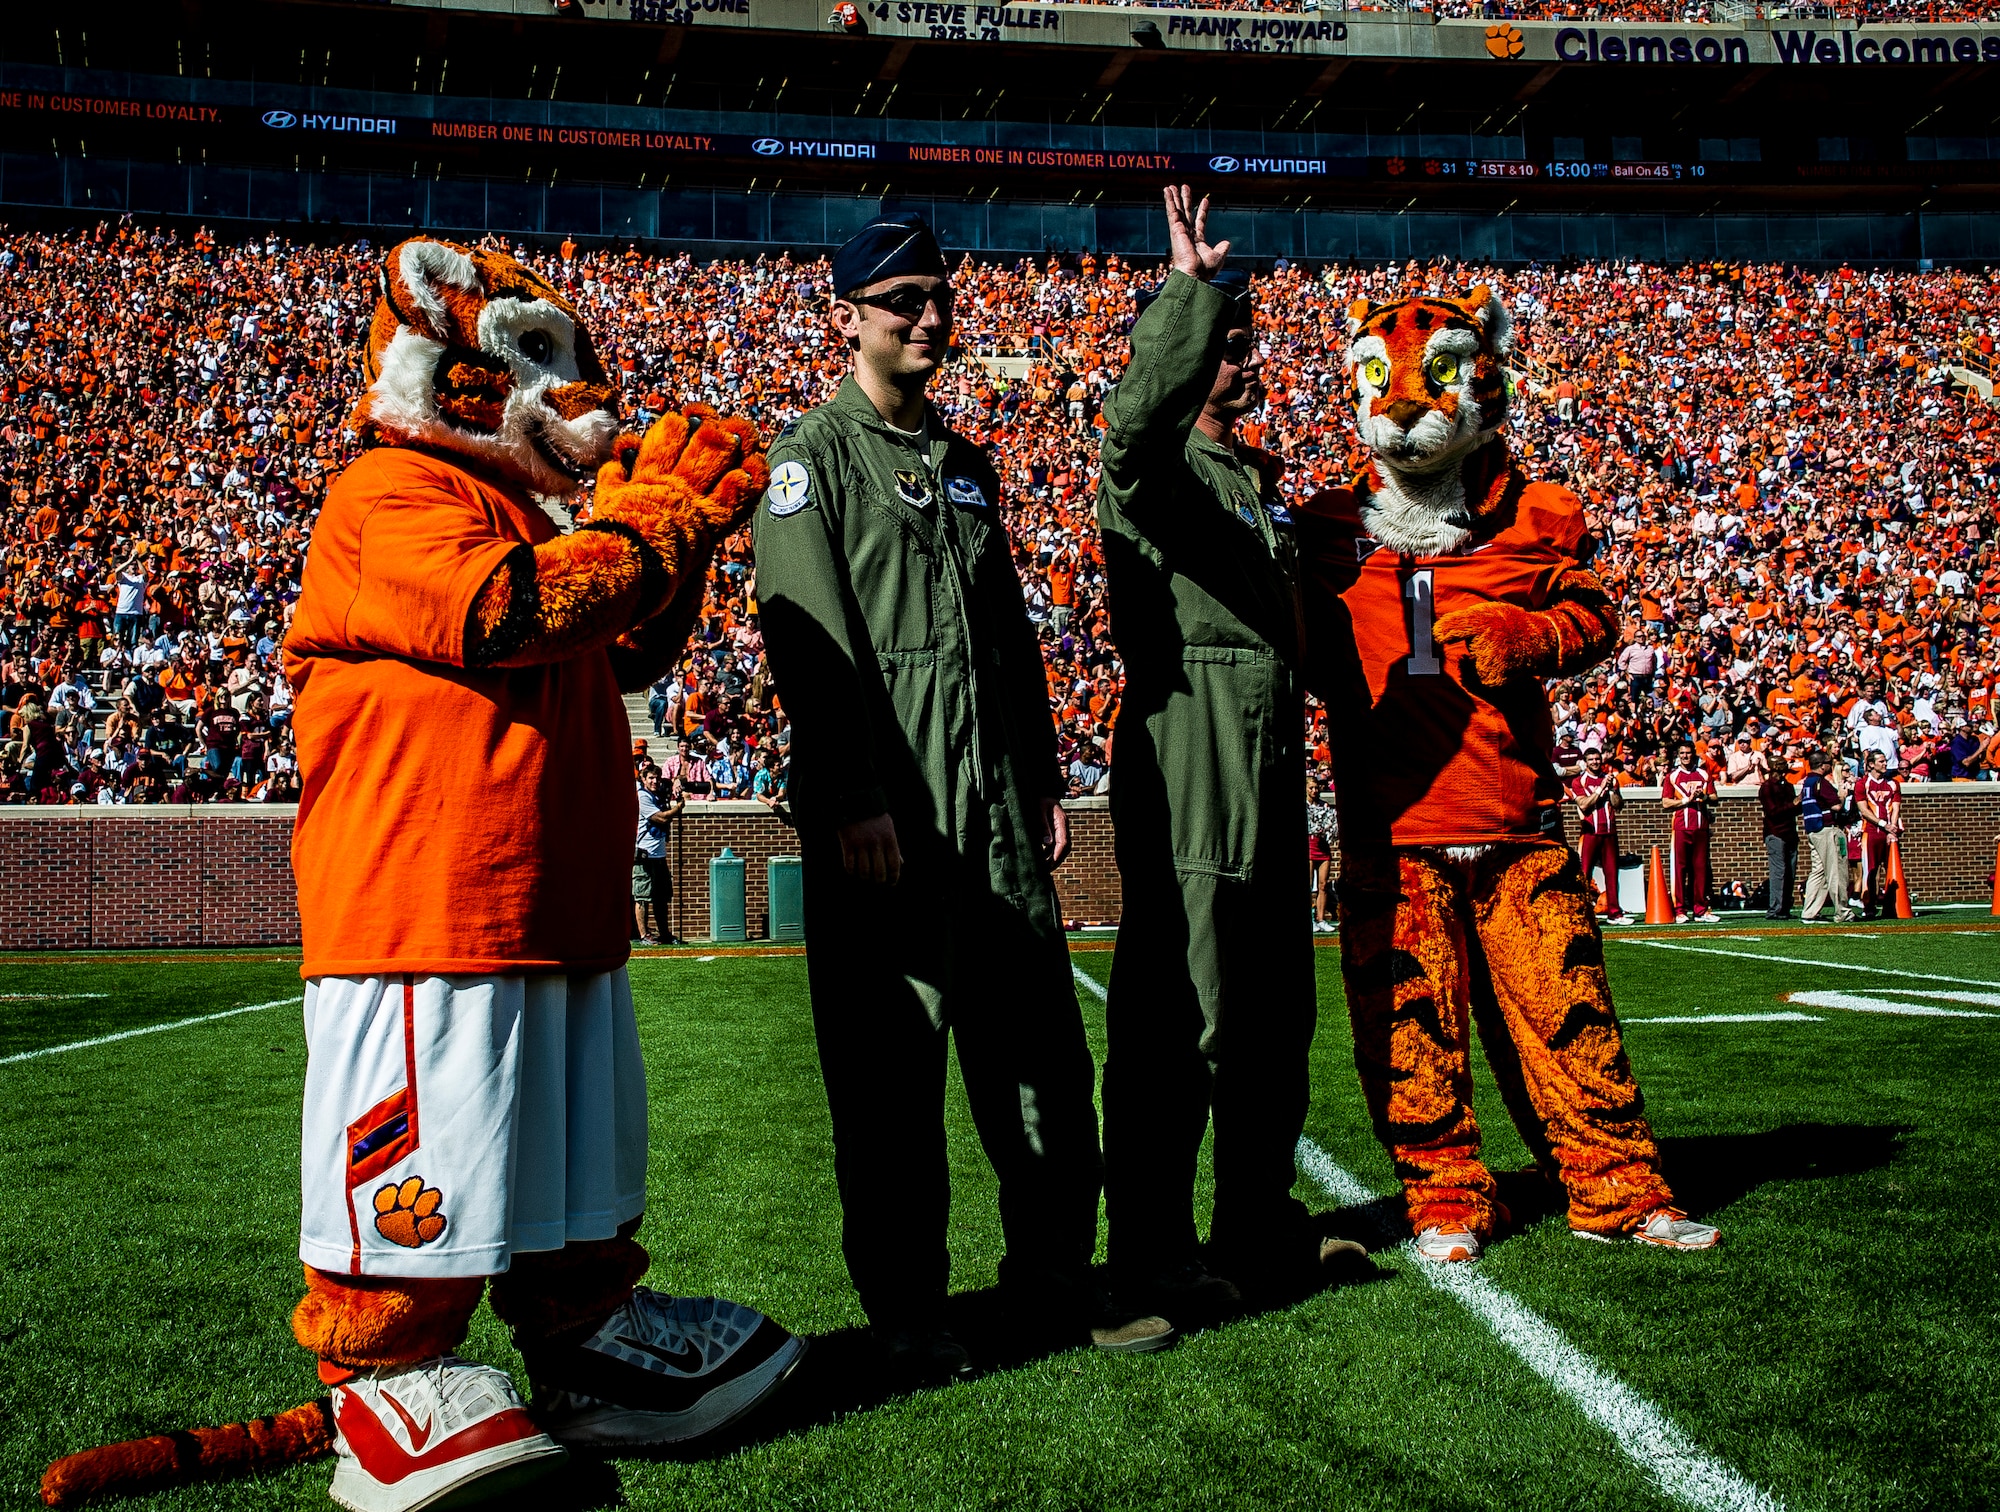 Capt. Justin Kulish (left) and Capt. Michael Polidor (right), B-2 Bomber pilots from Whiteman Air Force Base, Mo., stand with mascots from the Clemson Tigers during a ceremony Oct. 20, 2012, at Memorial Stadium, Clemson S.C. The two pilots were recognized for their efforts providing close-air support during an insurgent ambush of Command Outpost Keating in October 2009. (U.S. Air Force photo/Senior Airman Dennis Sloan) 